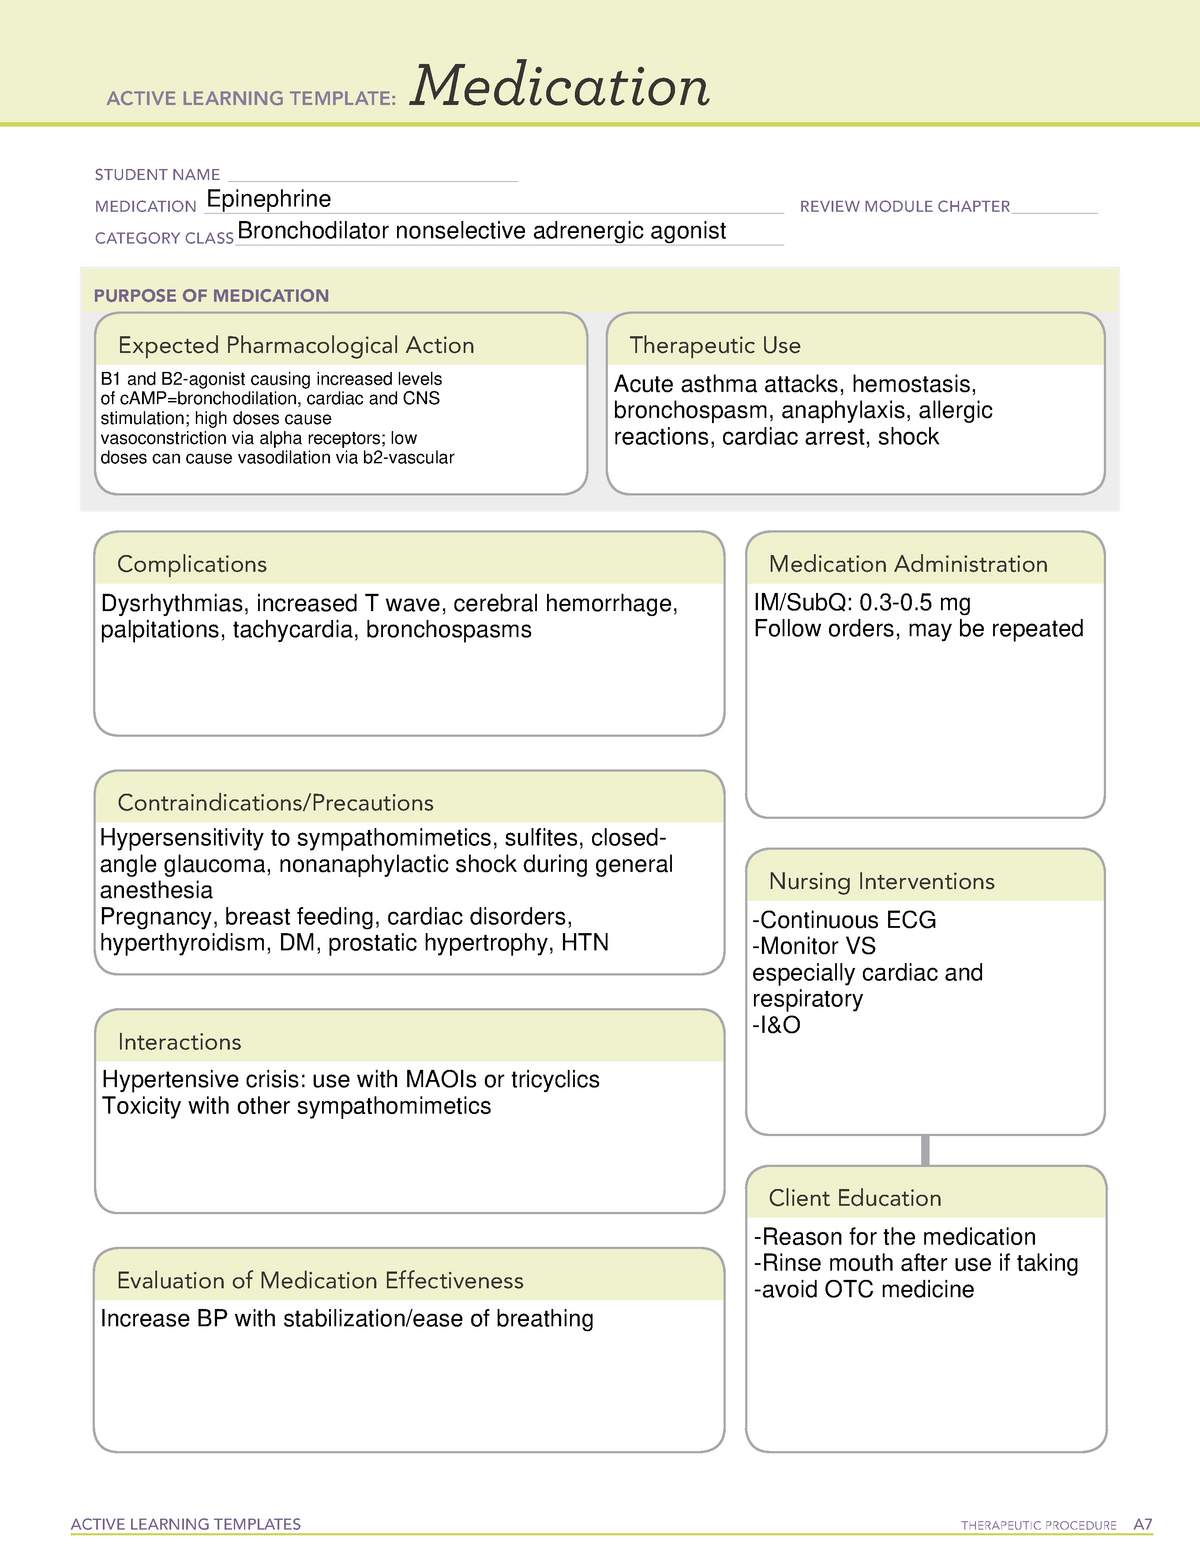 Epinephrine ati ACTIVE LEARNING TEMPLATES THERAPEUTIC PROCEDURE A